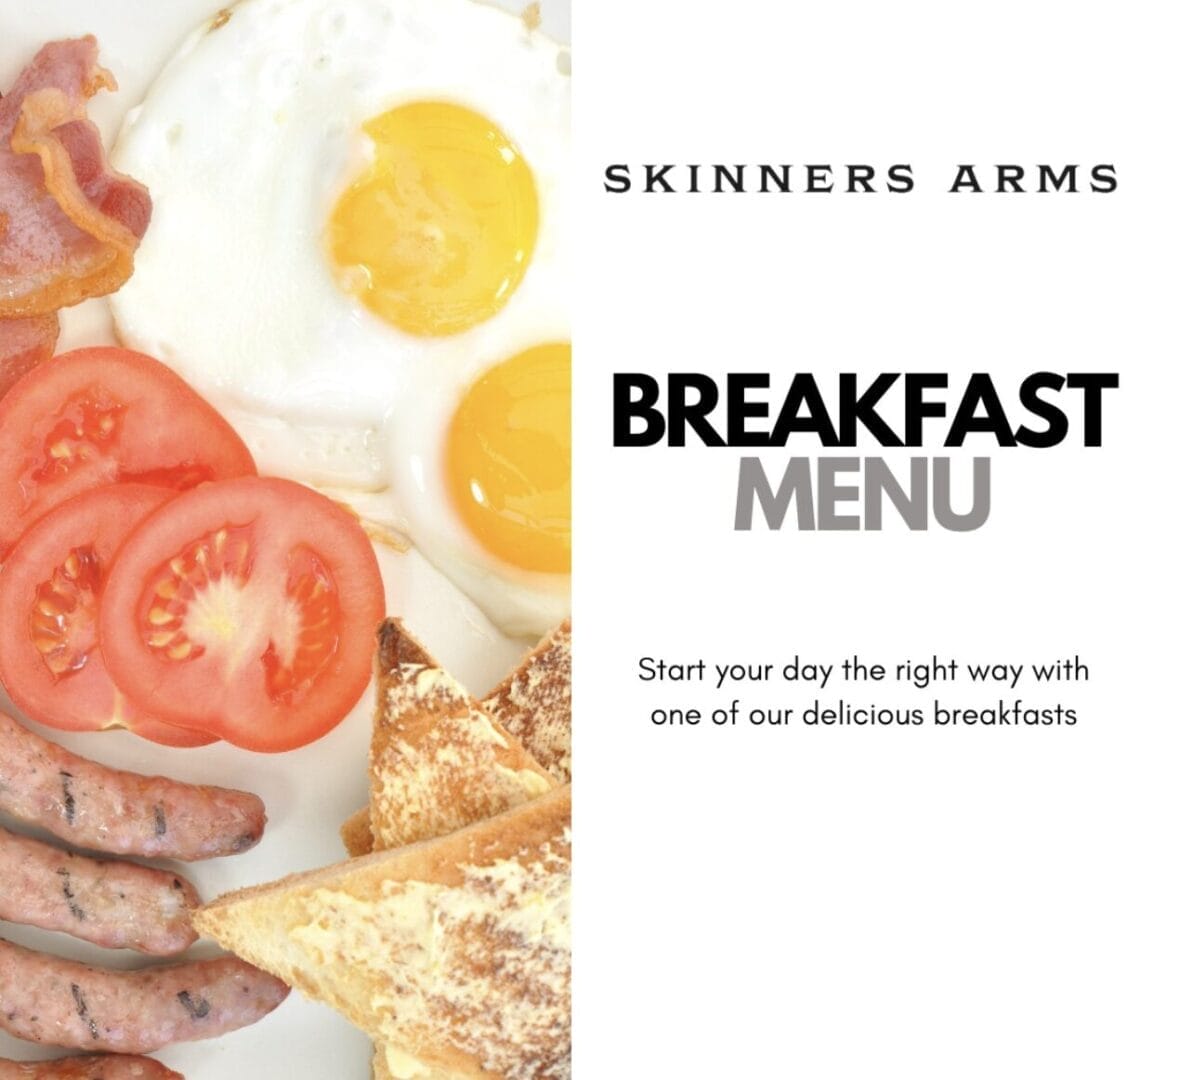 Pubs In Essex For Breakfast - Indulge At The Skinners Arms !